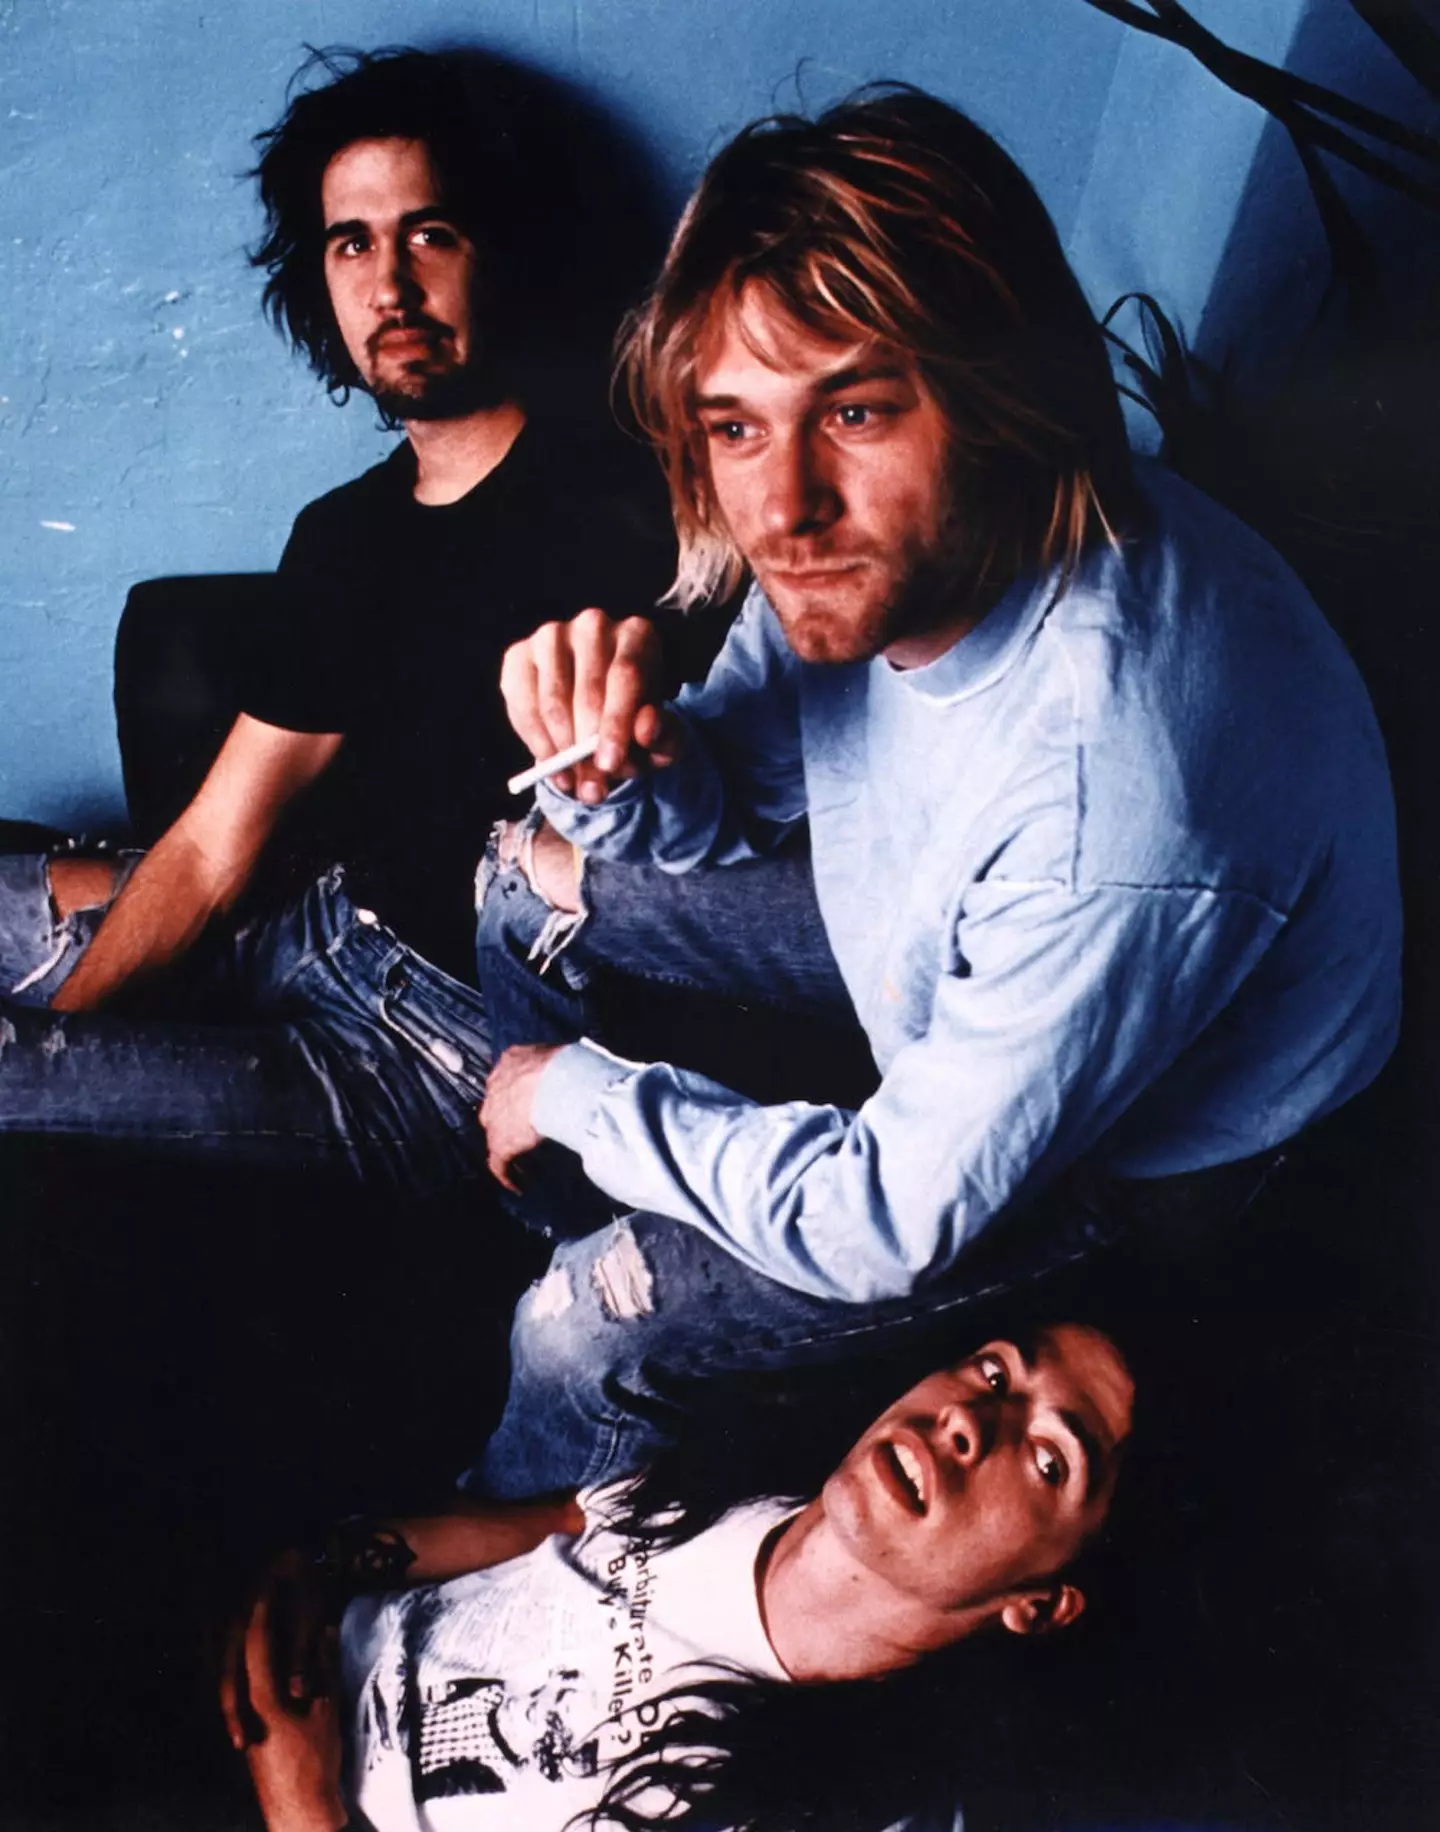 The judge ruled in favour of Nirvana's representatives.